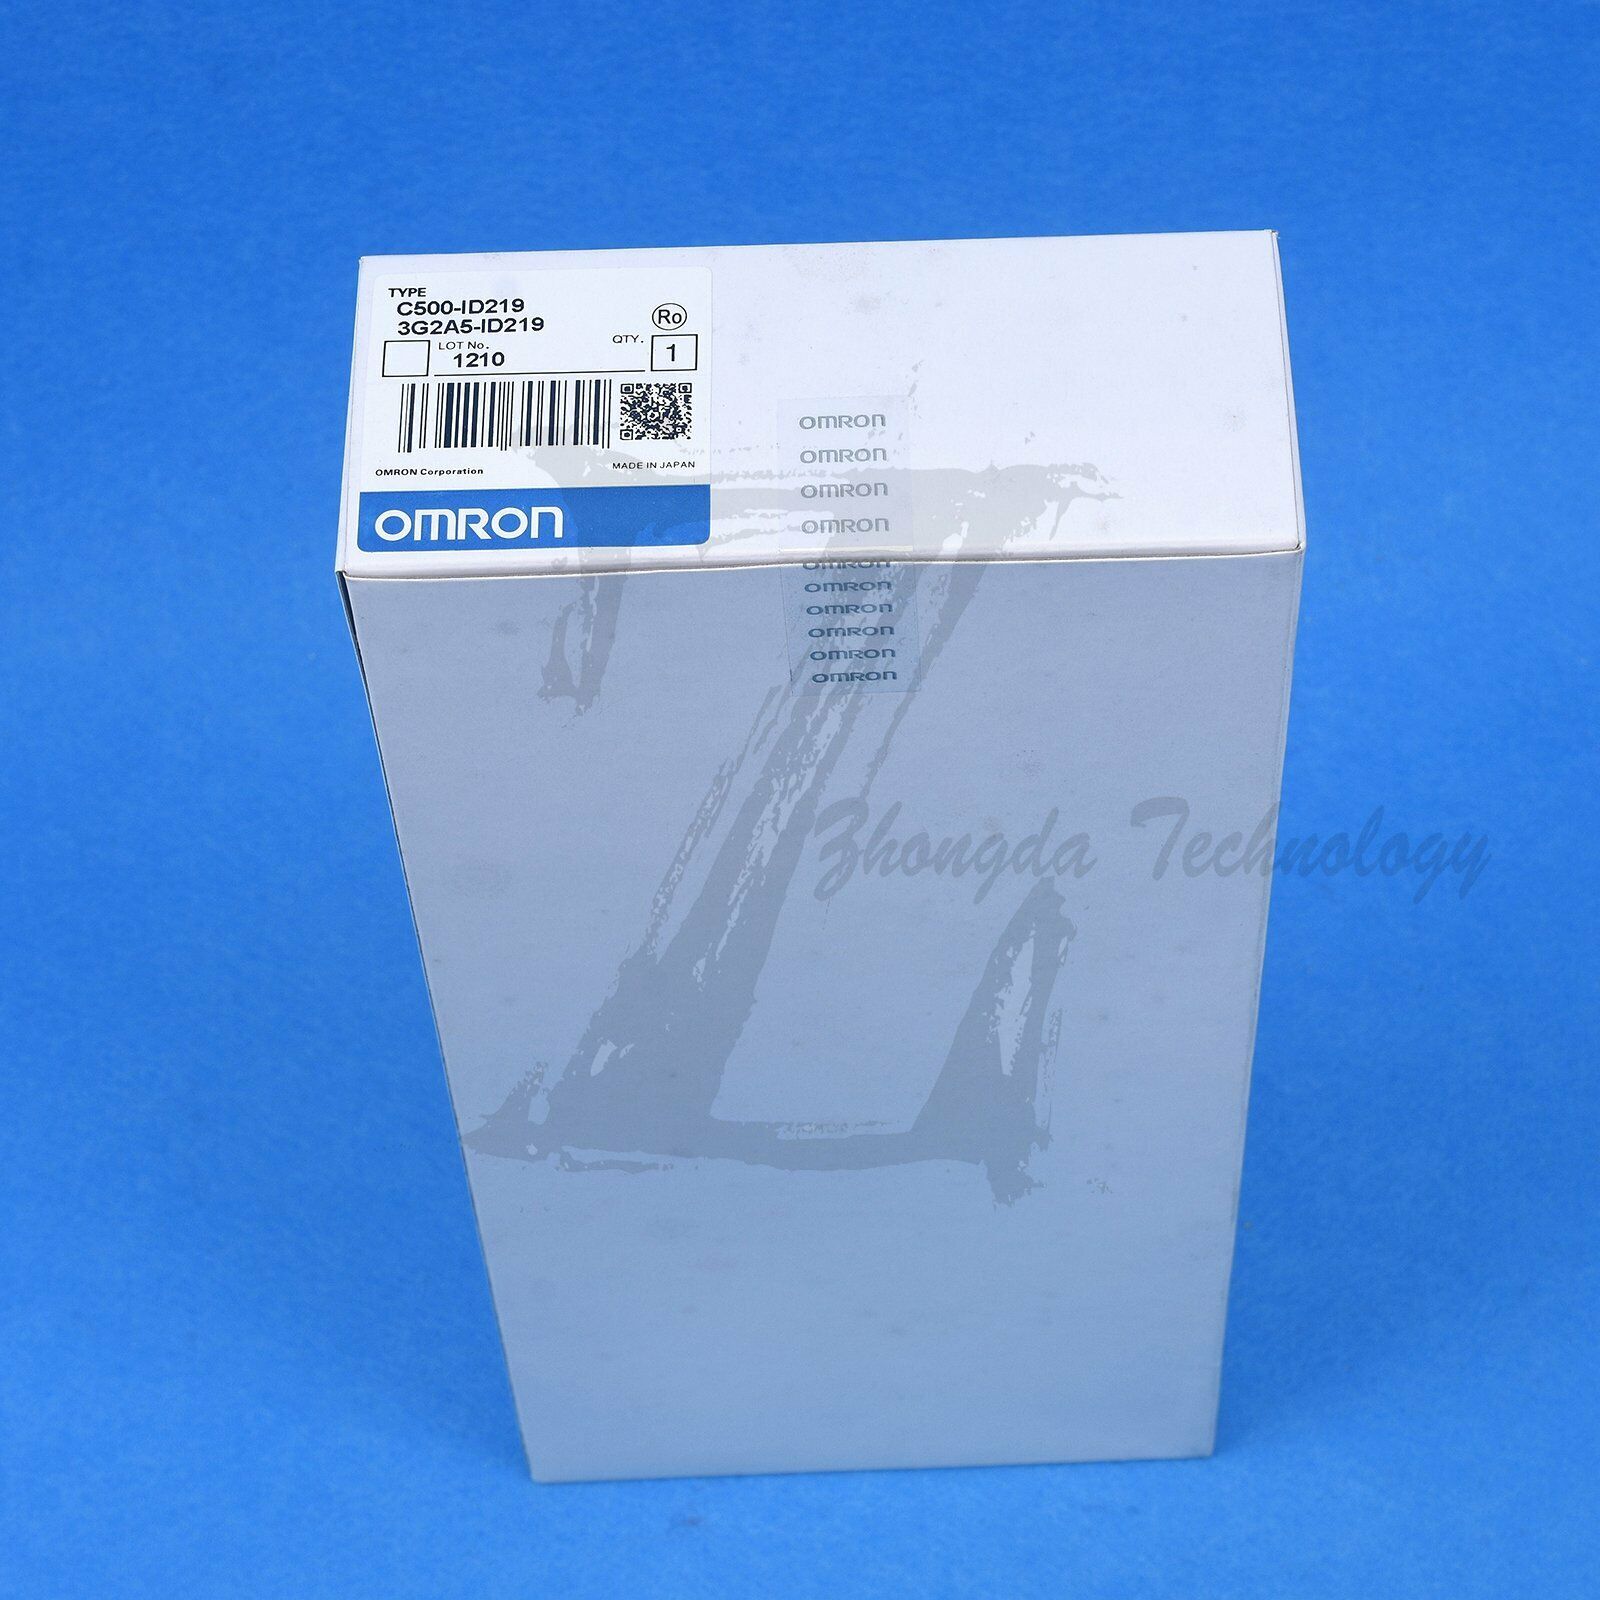 1pc new Omron C500-ID219 module Free shipping, fast delivery KOEED 101-200, 90%, import_2020_10_10_031751, Omron, Other